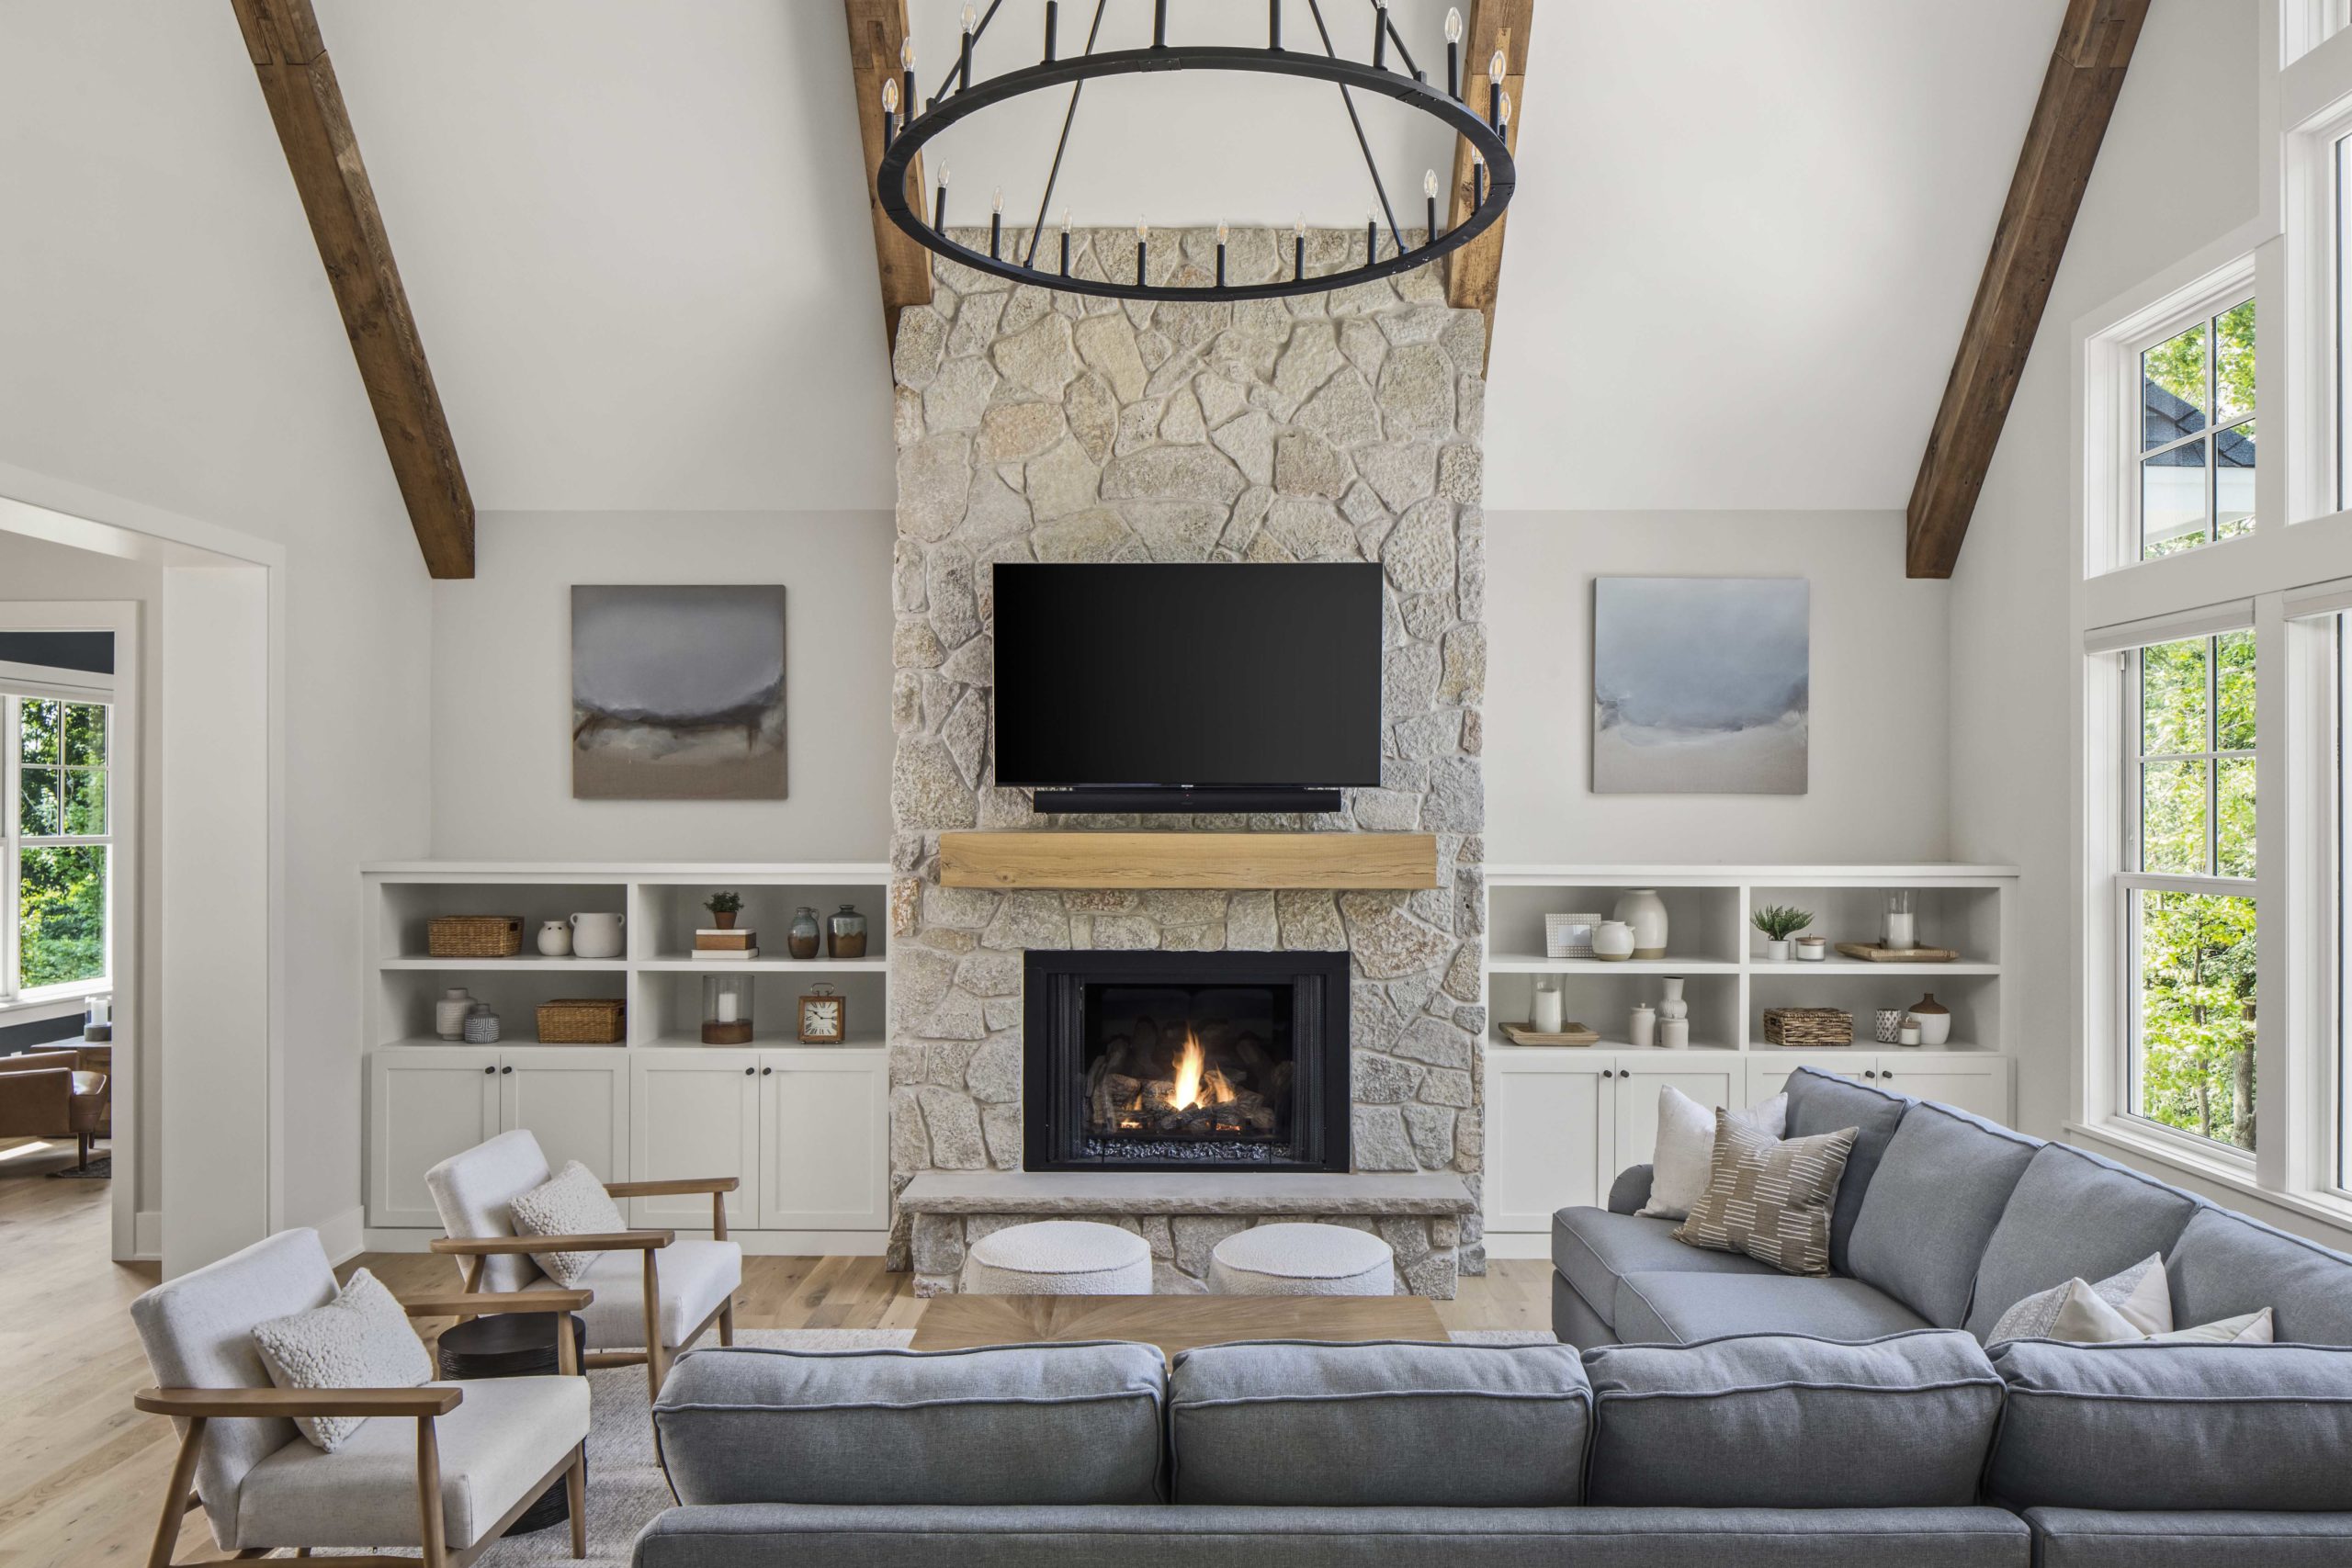 A custom lake home build with a living room featuring a stone fireplace and wooden beams.